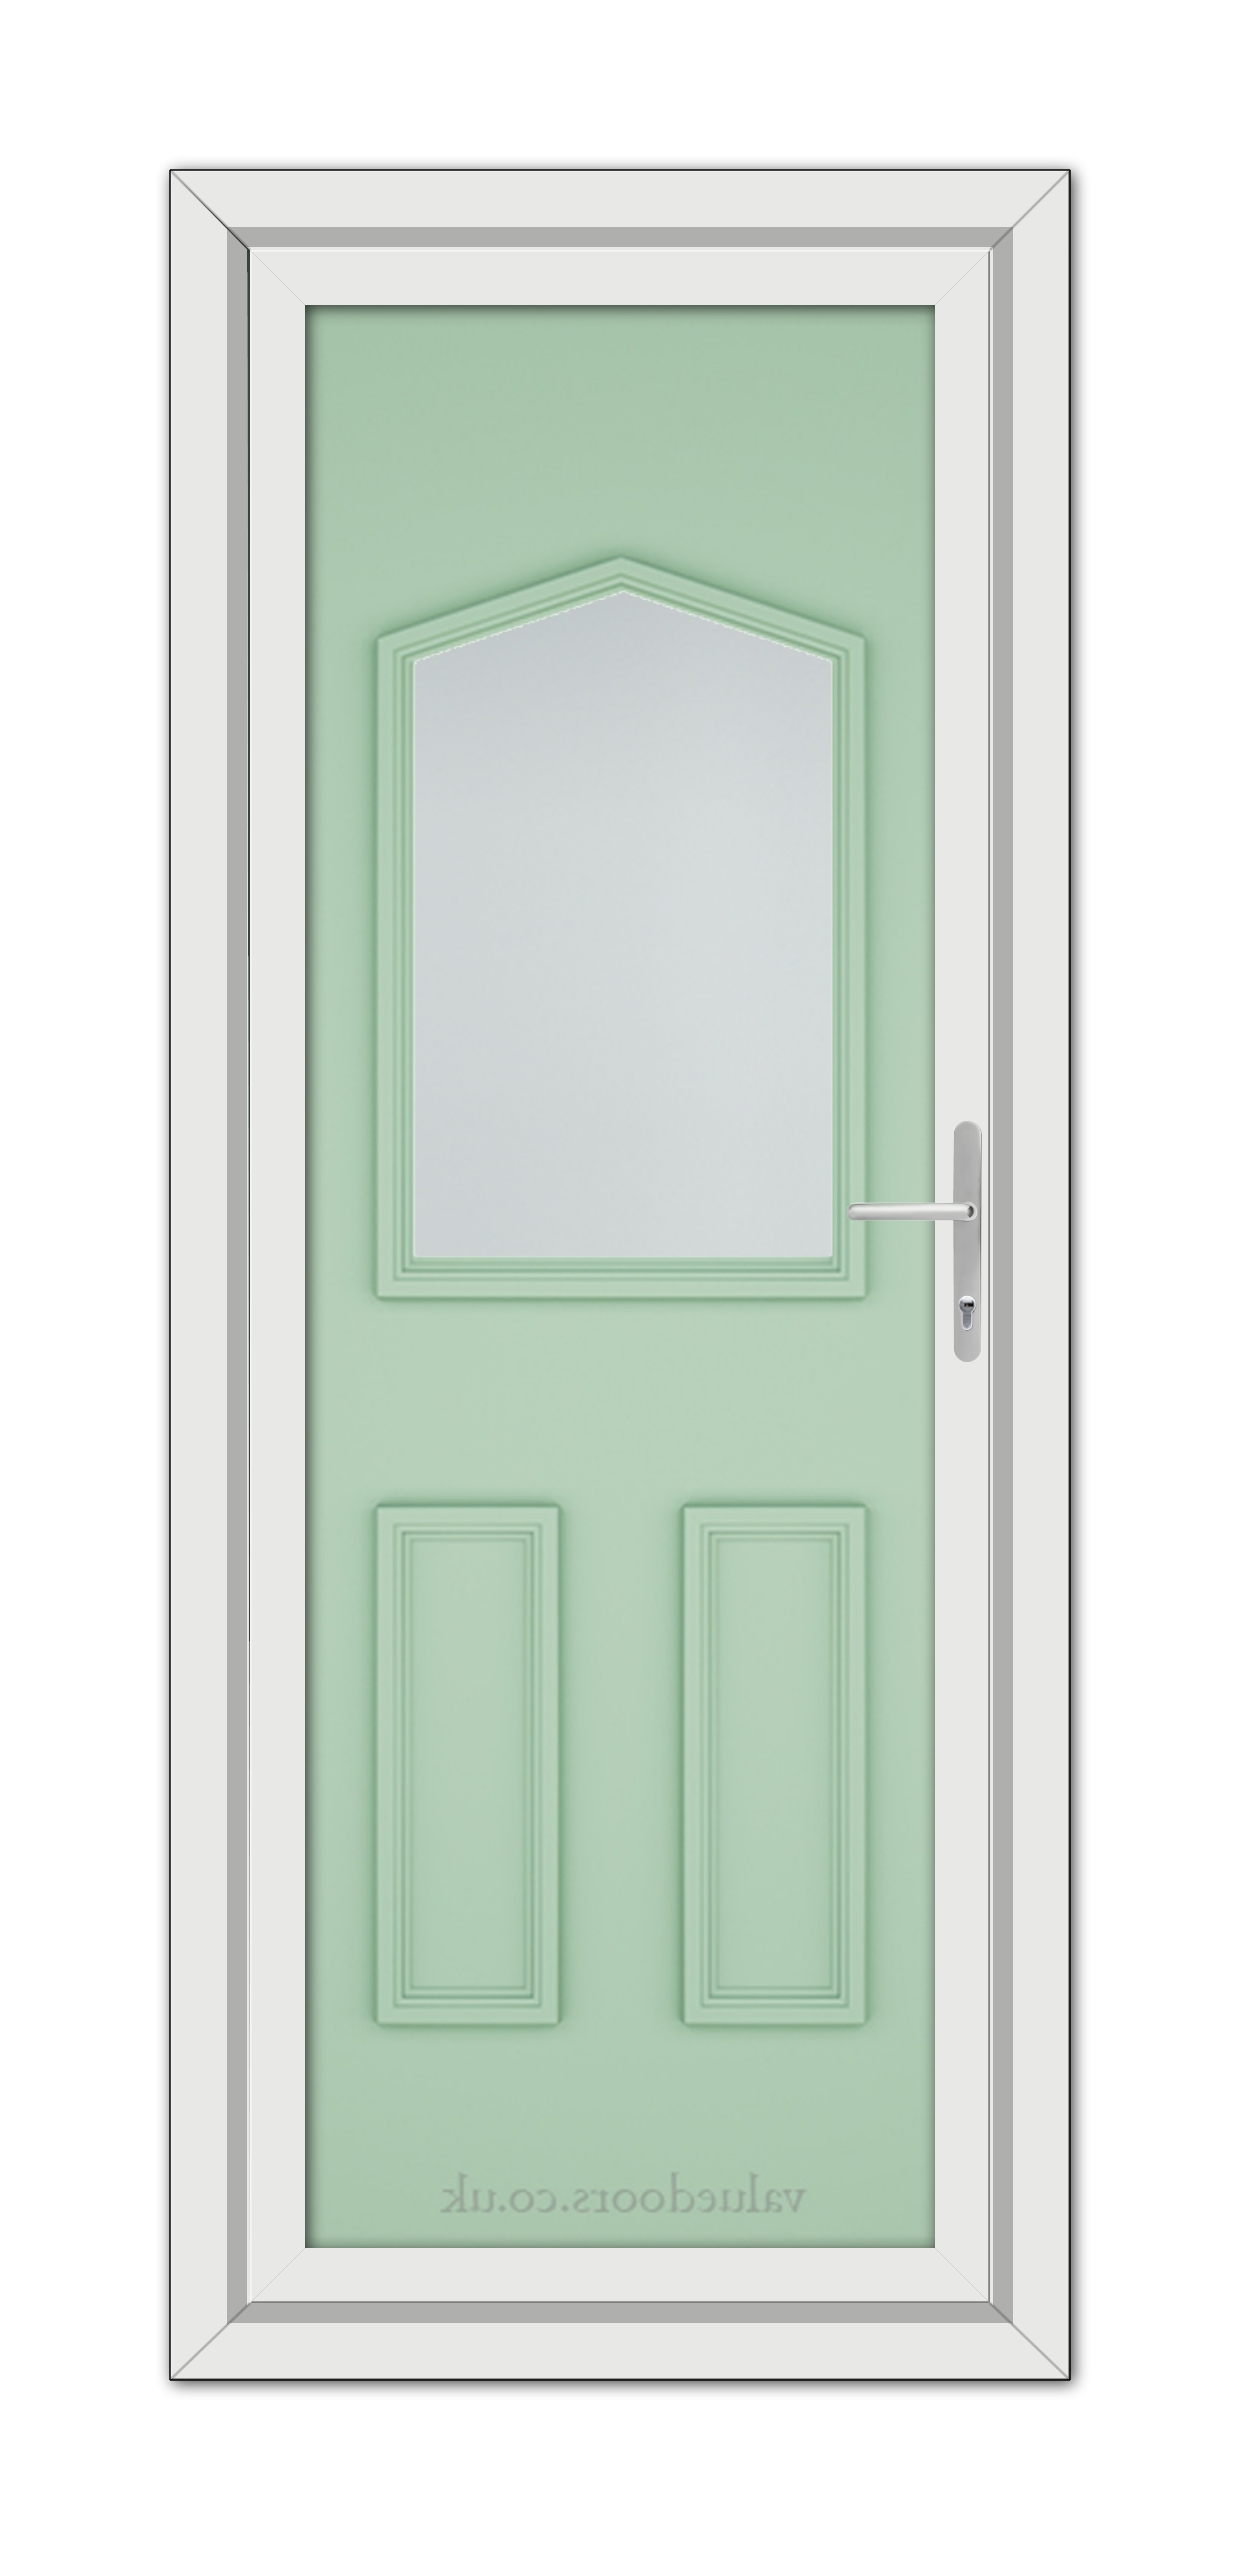 A close-up of a Chartwell Green Oxford uPVC Door.